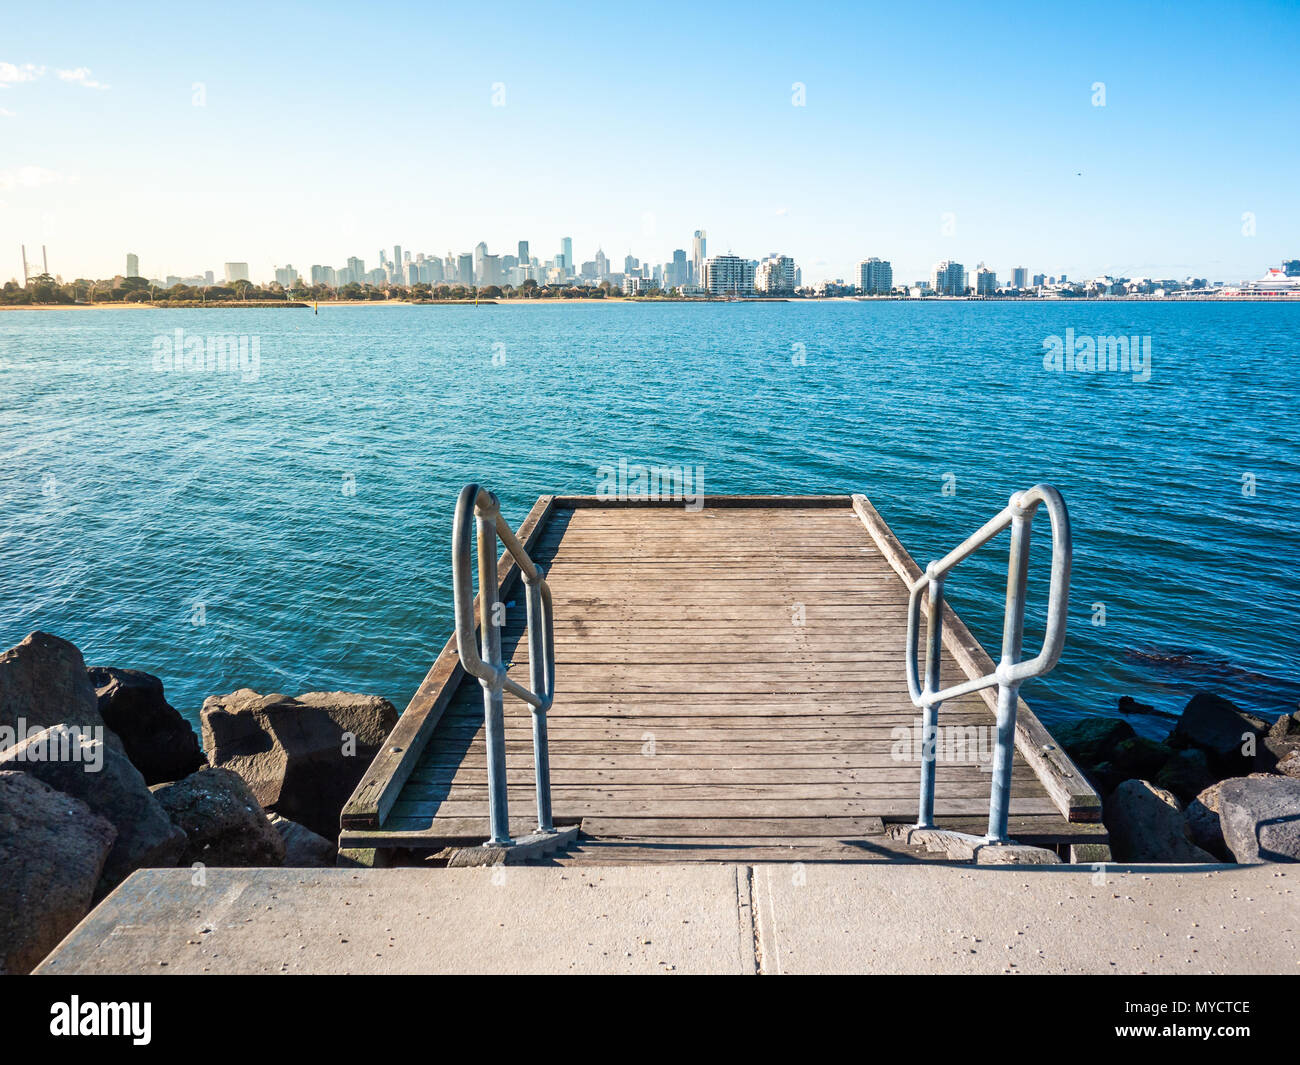 https://c8.alamy.com/comp/MYCTCE/view-from-a-fishing-platform-with-melbourne-citys-skyscrapers-in-distance-beautiful-environment-at-seashore-near-port-melbourne-MYCTCE.jpg